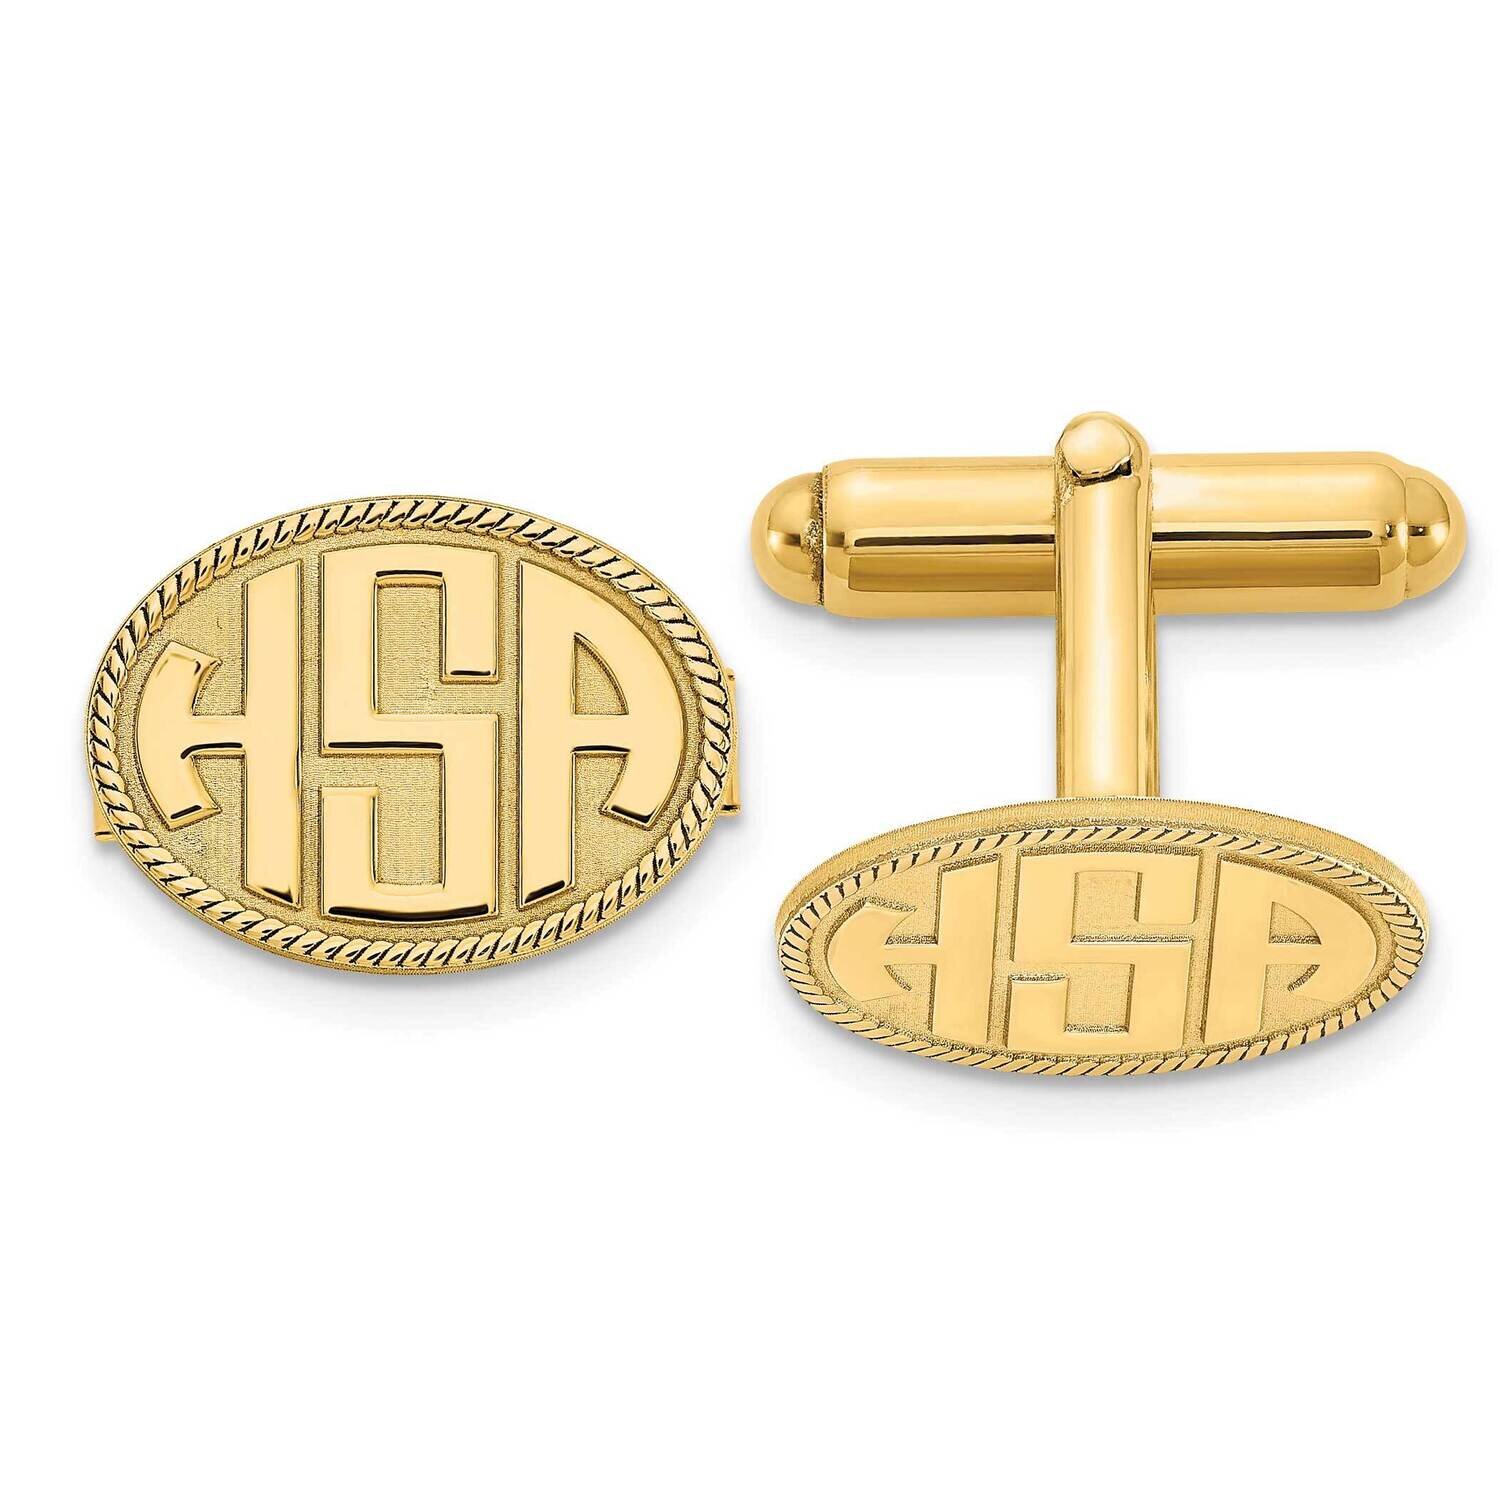 Oval with Boarder Raised Letters Monogram Cufflinks Gold-plated Sterling Silver XNA623GP